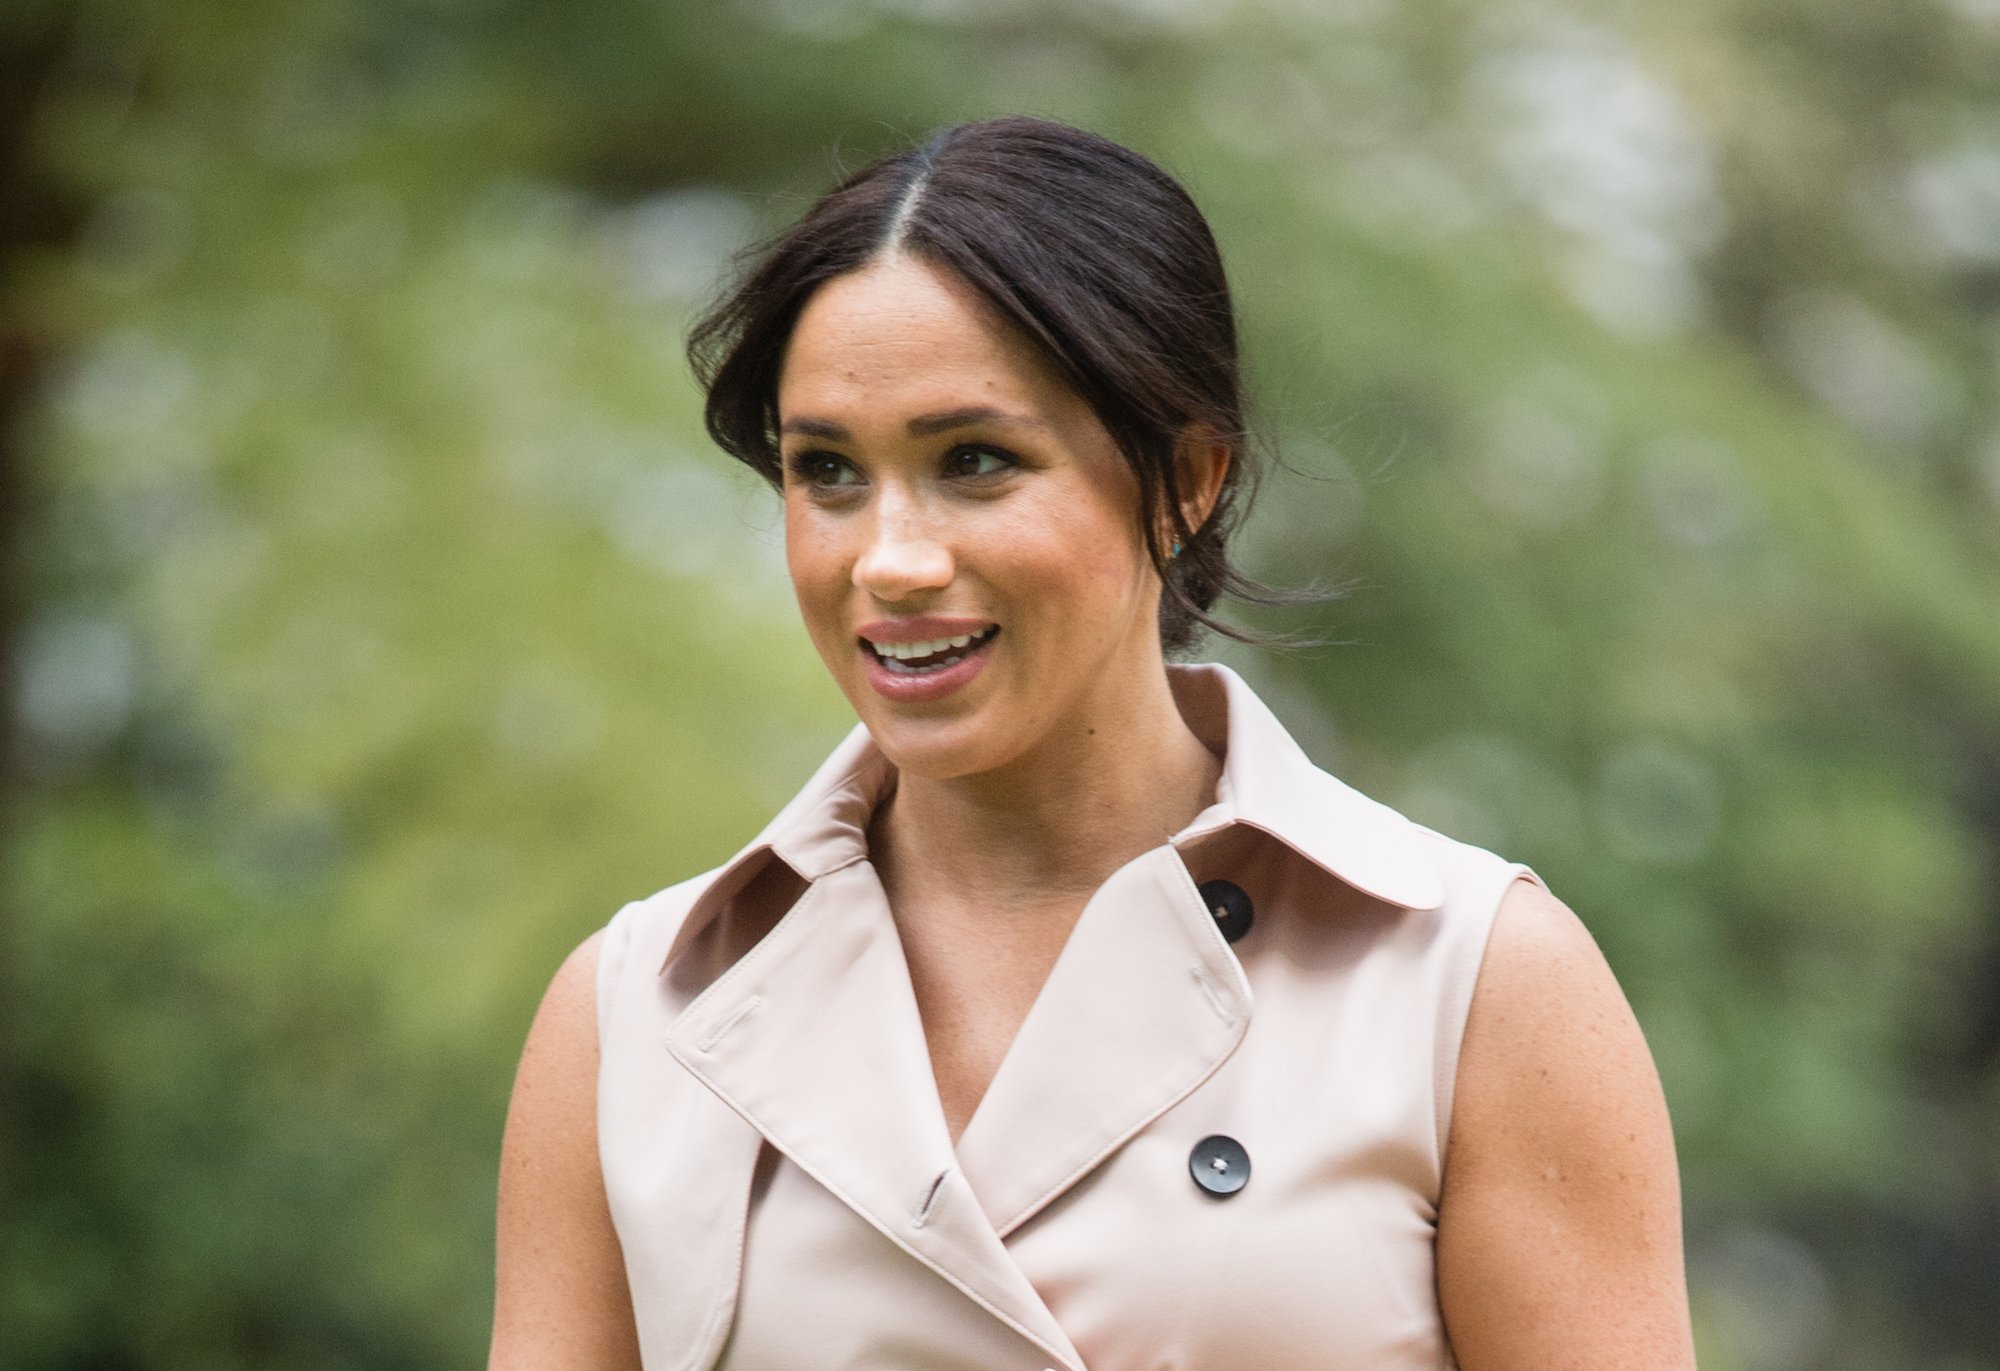 Meghan Markle's race gets a lot of attention, but she keeps on smiling like this toward the critics.